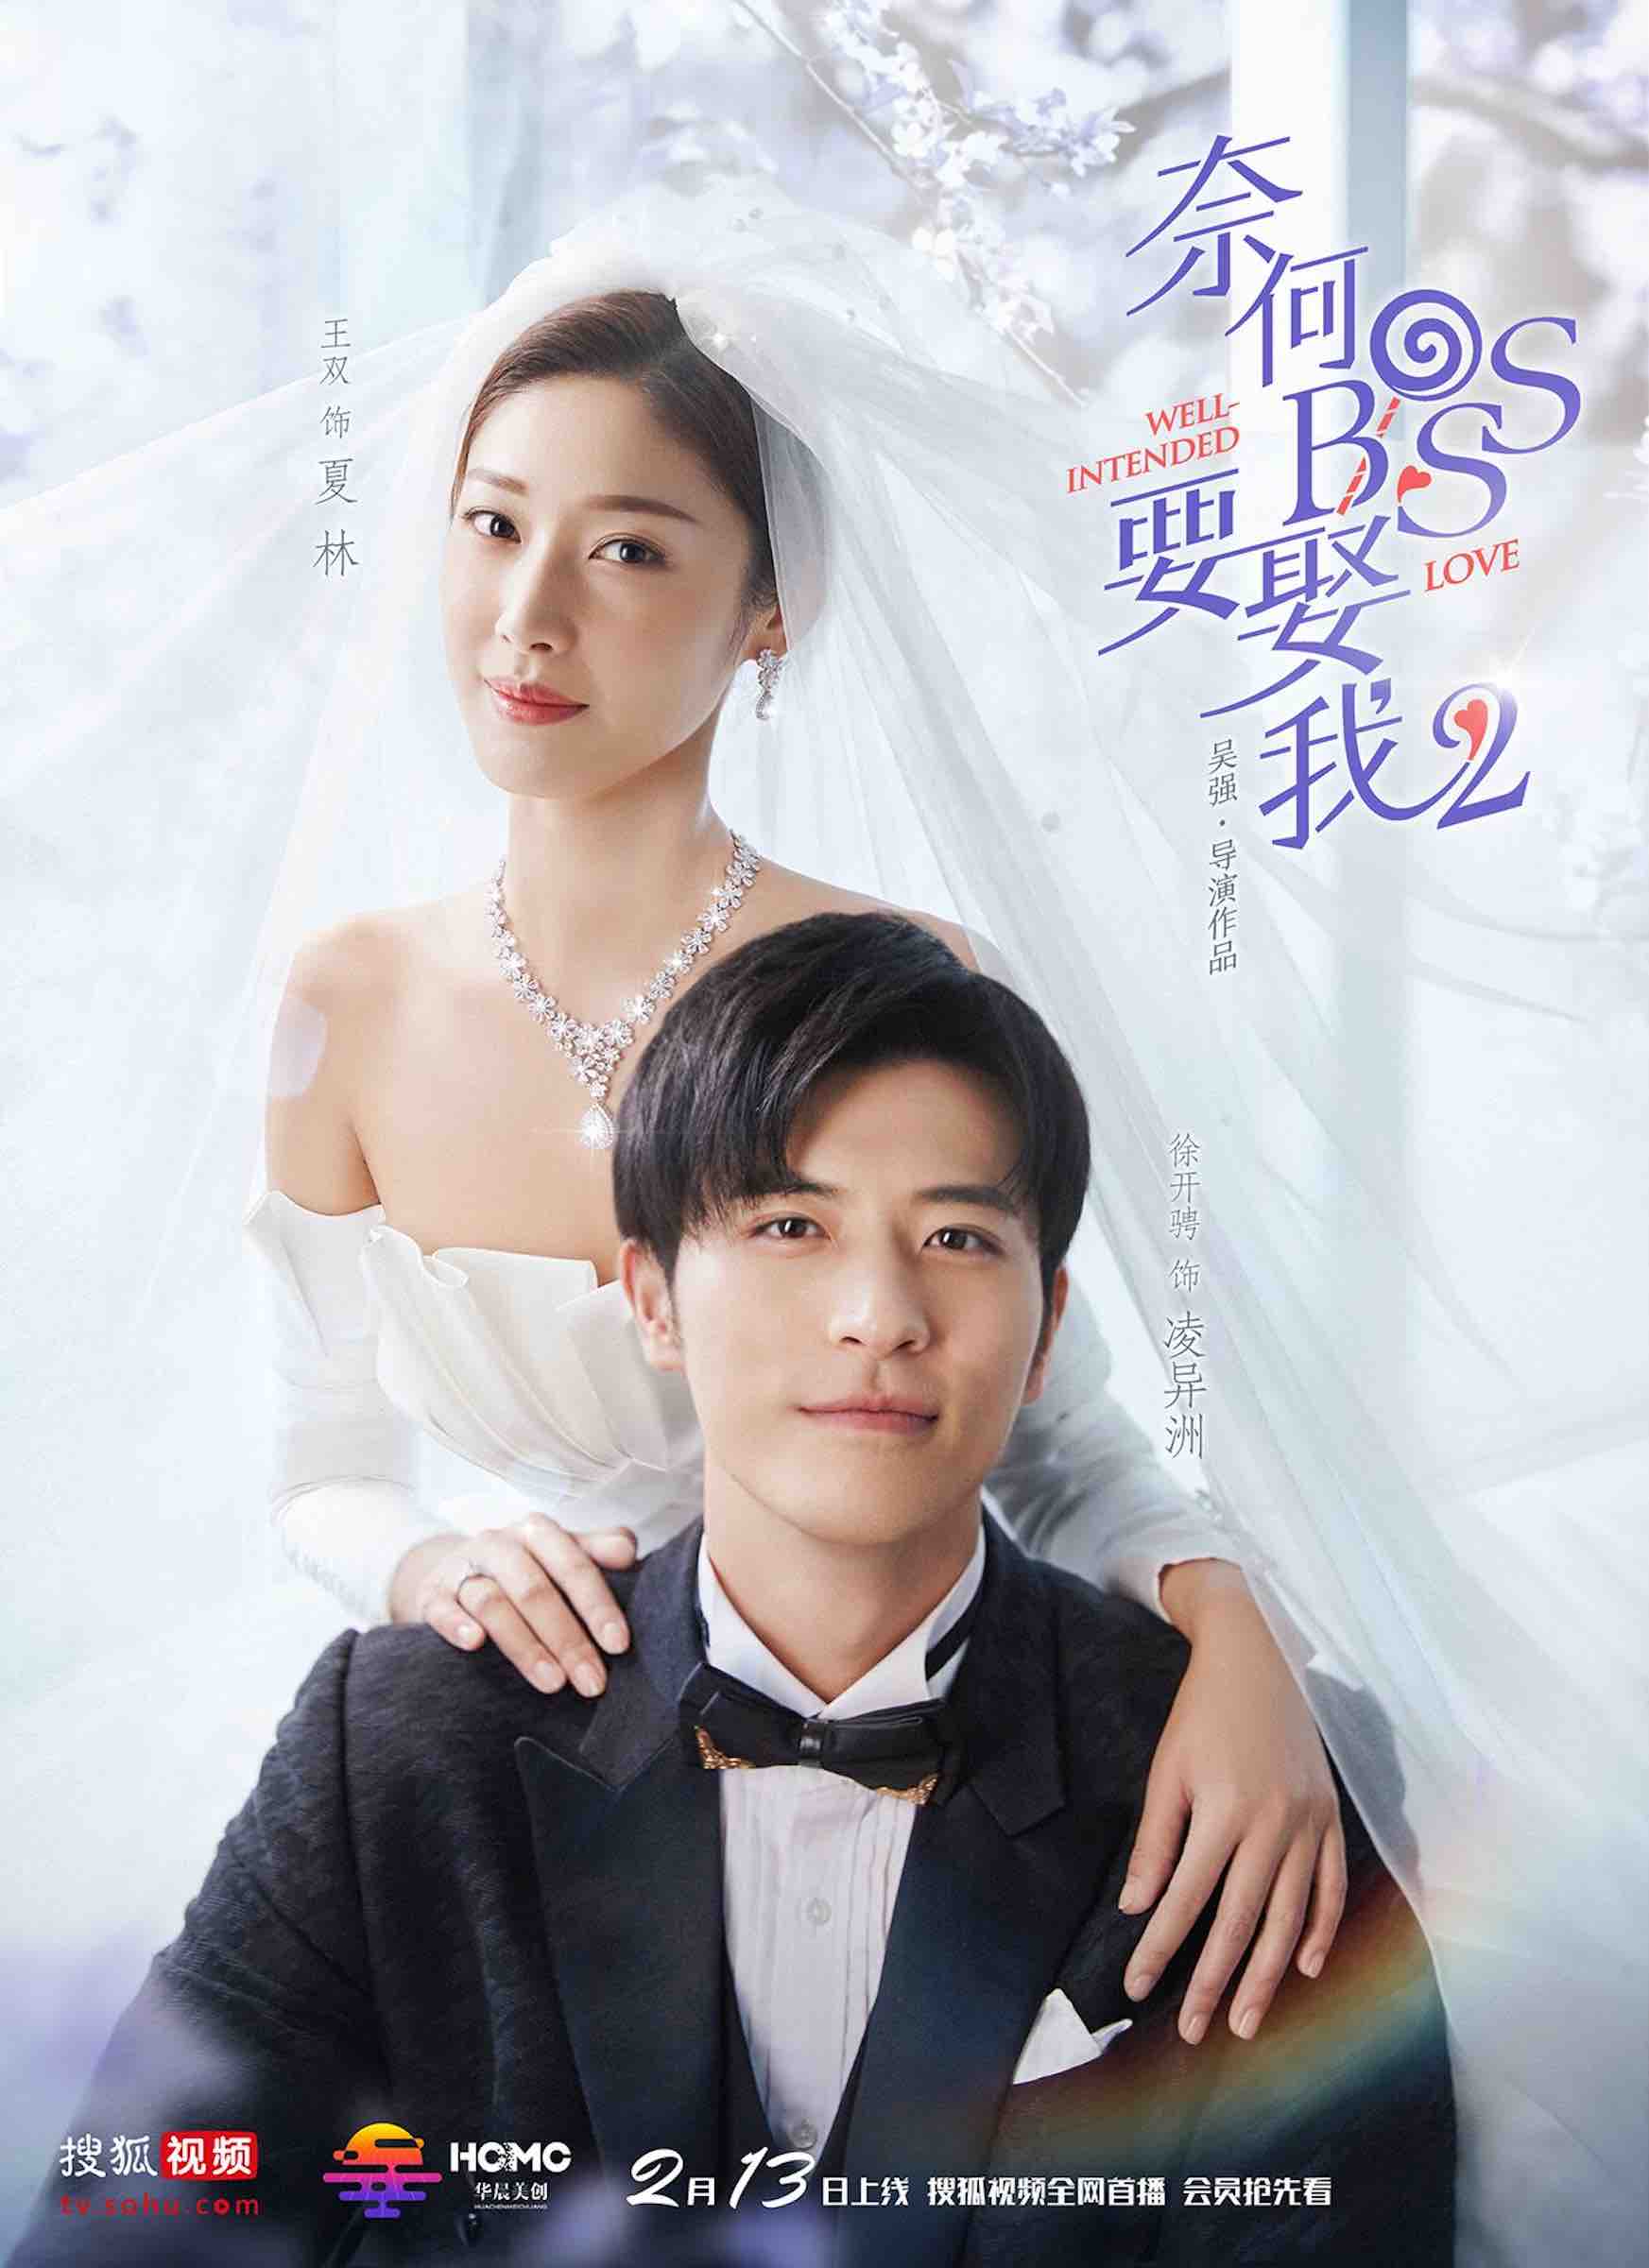 Here's Why 'Well Intended Love' Is The C Drama You Need Right Now